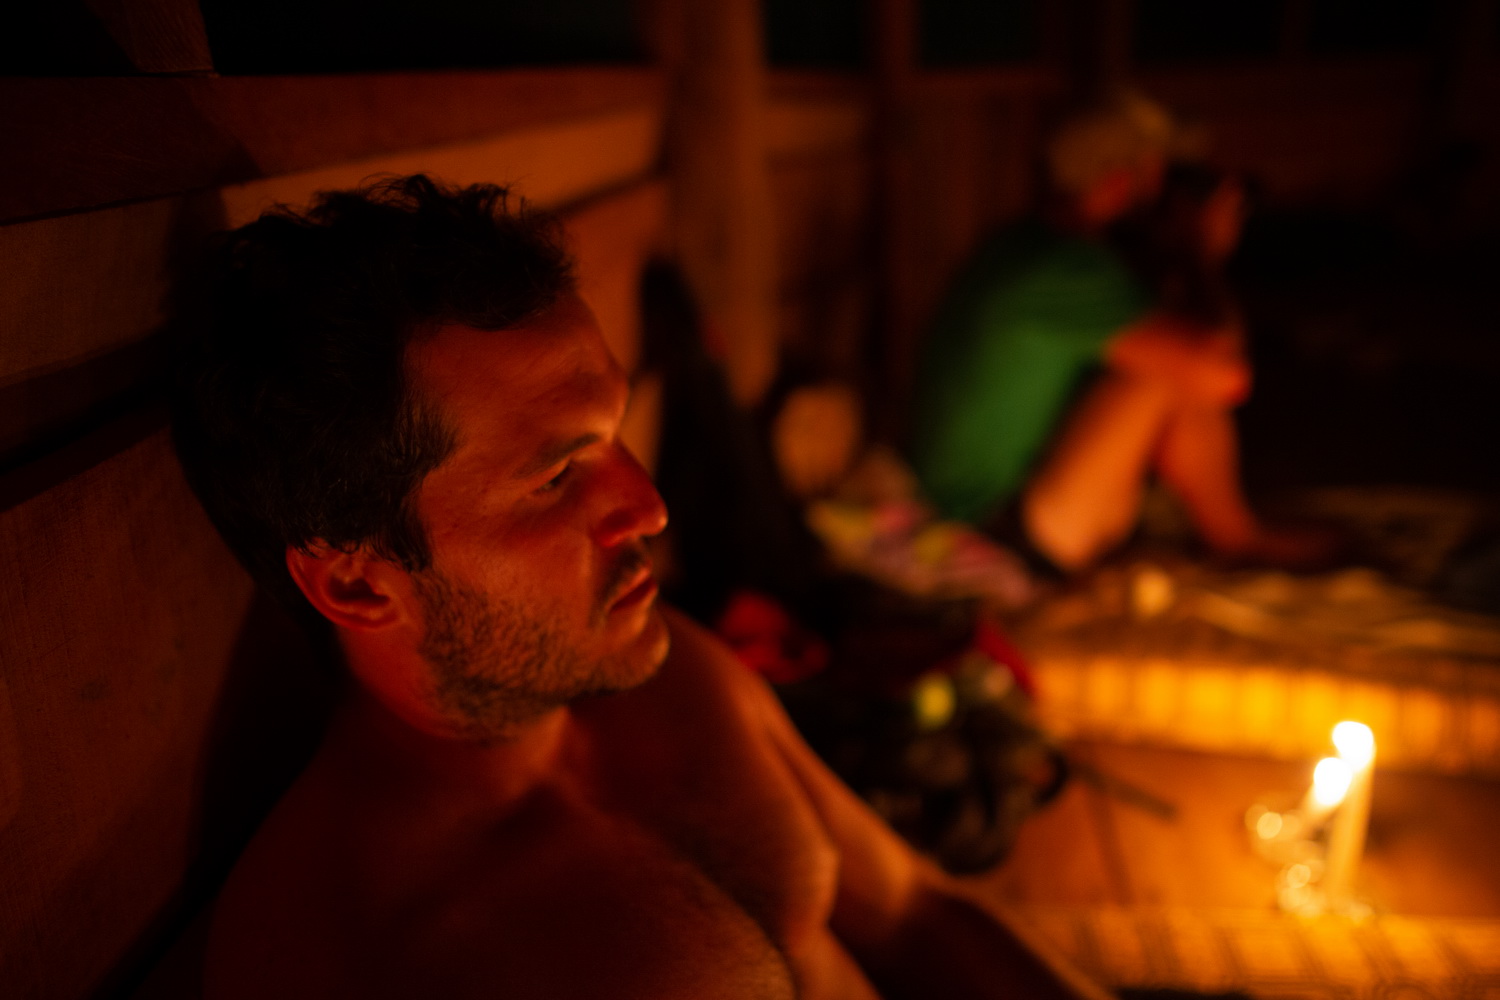 This is a photo of a man, Jesse Gould, in dim candlelight from the side. He is very relaxed, laying down outside, and not wearing a shirt.